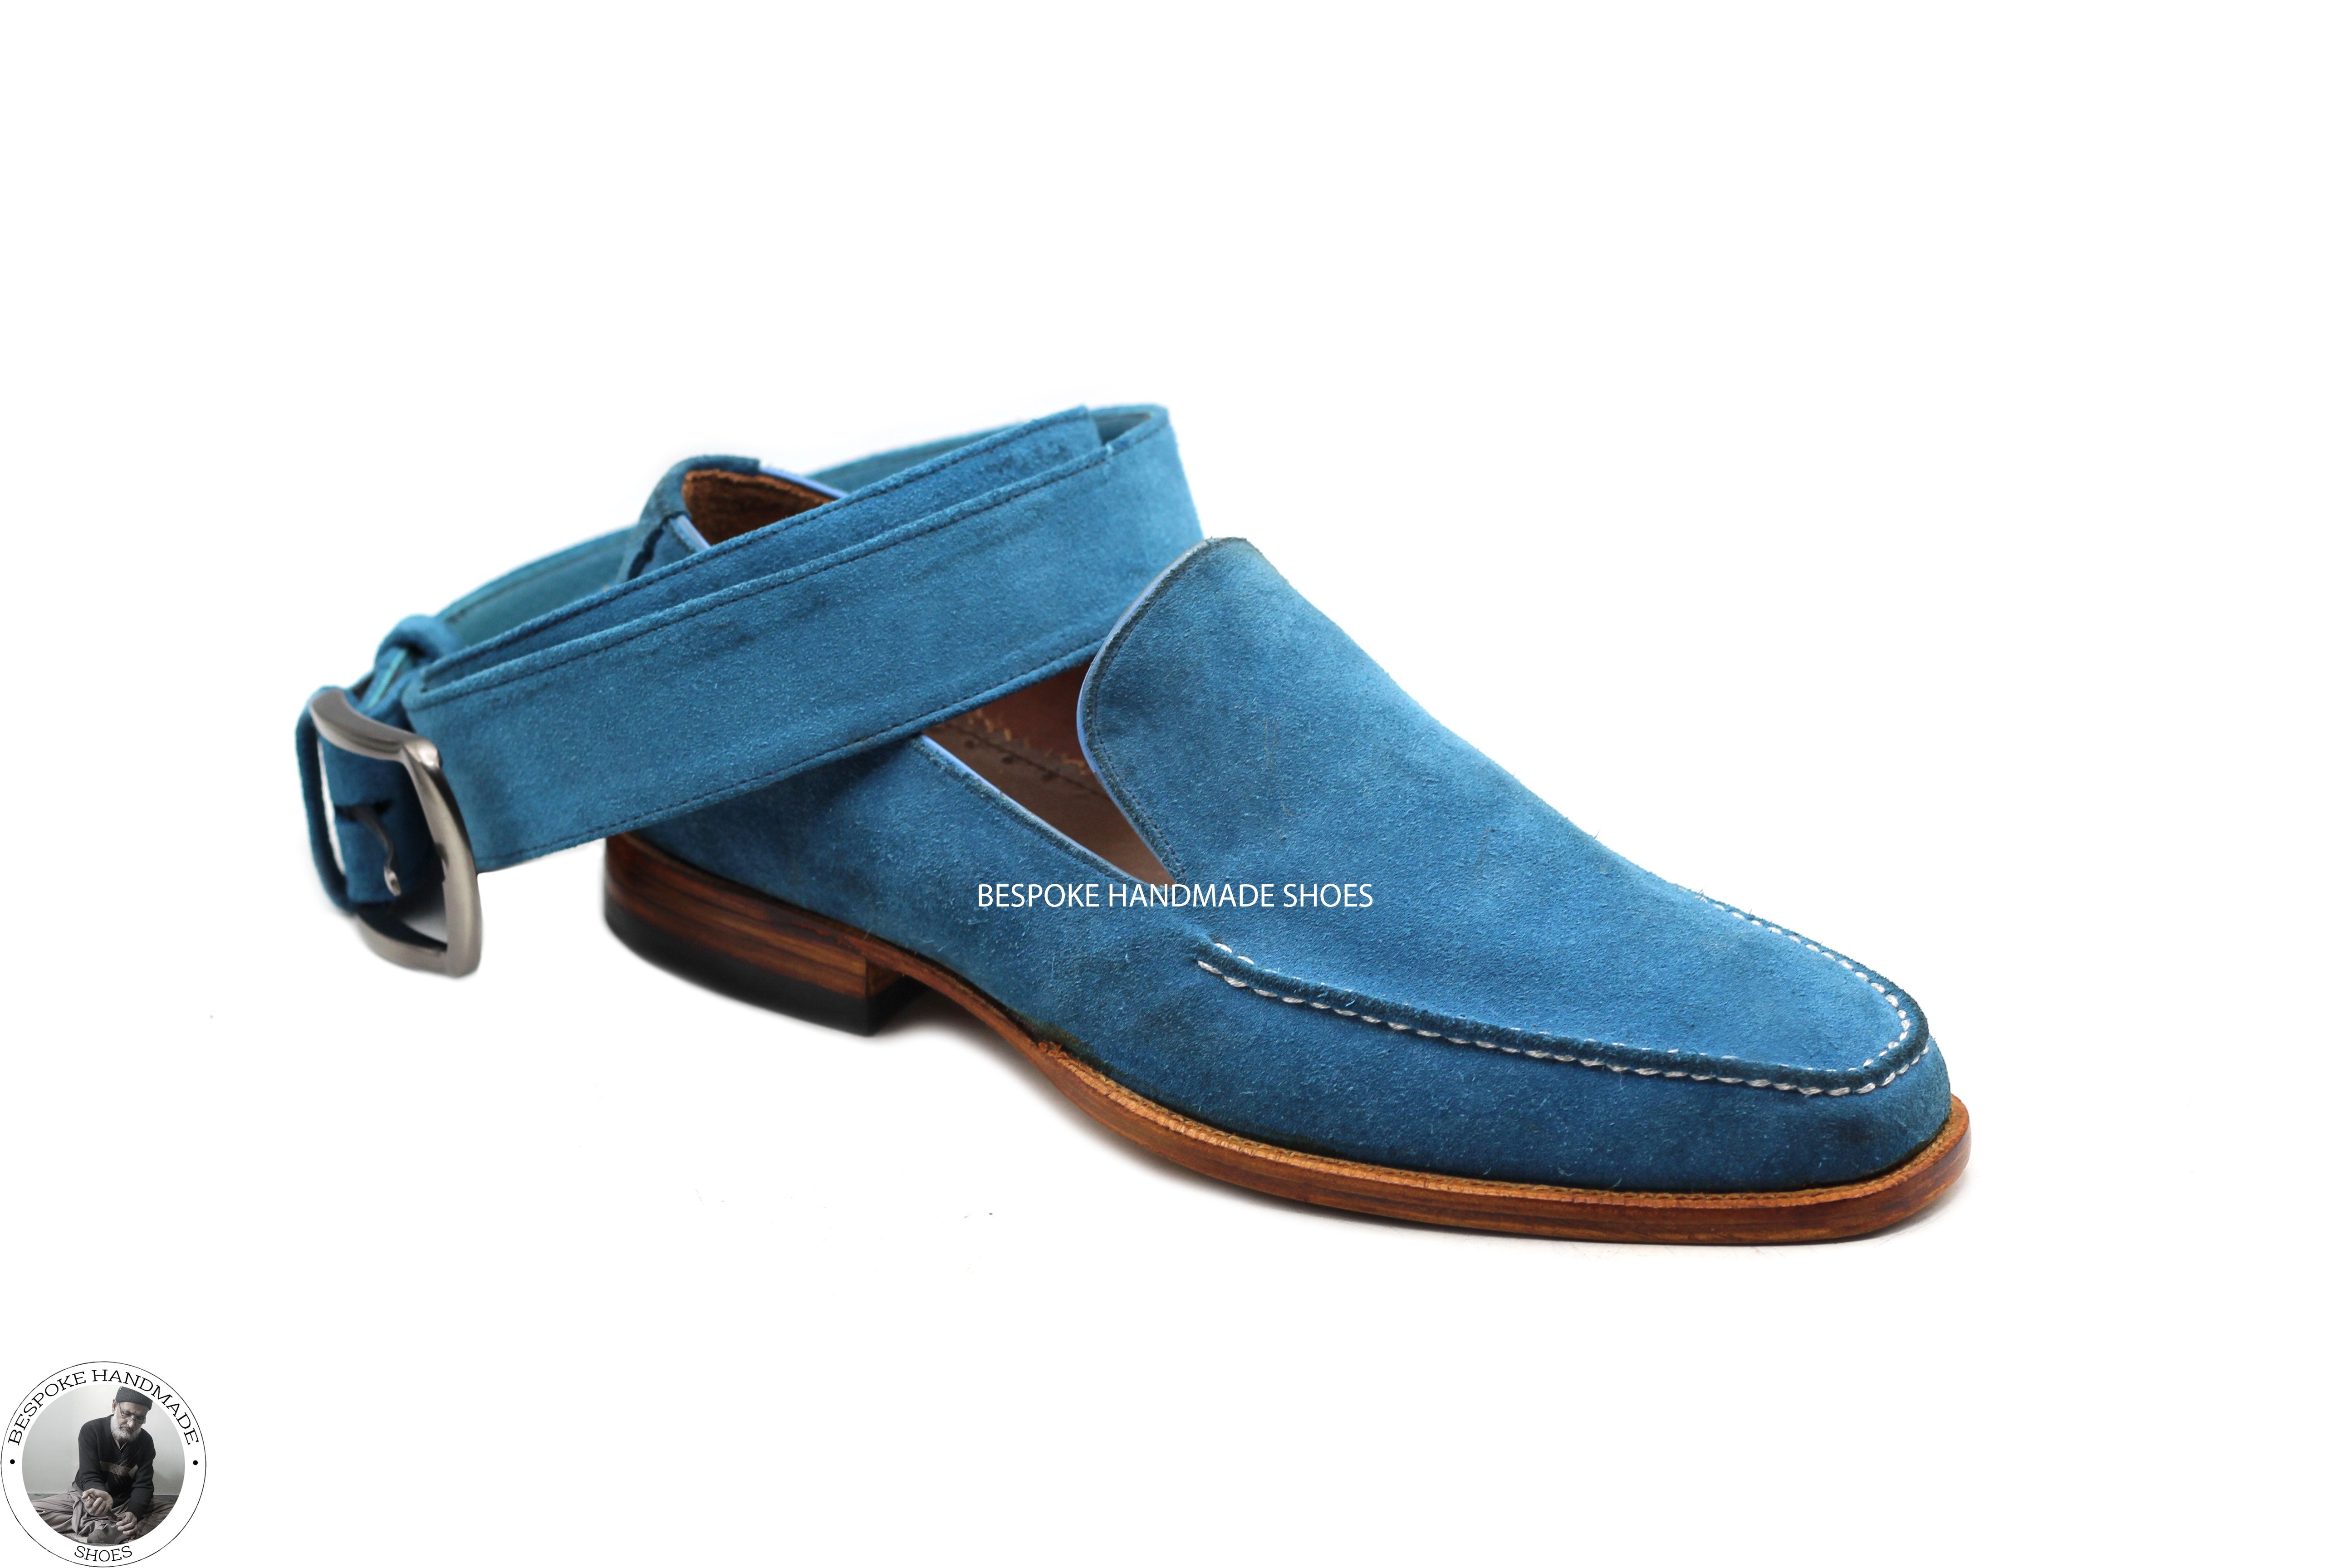 Buy Handmade Goodyear Welted Genuine Blue Suede Loafer Slip on Moccasin Men's Shoes